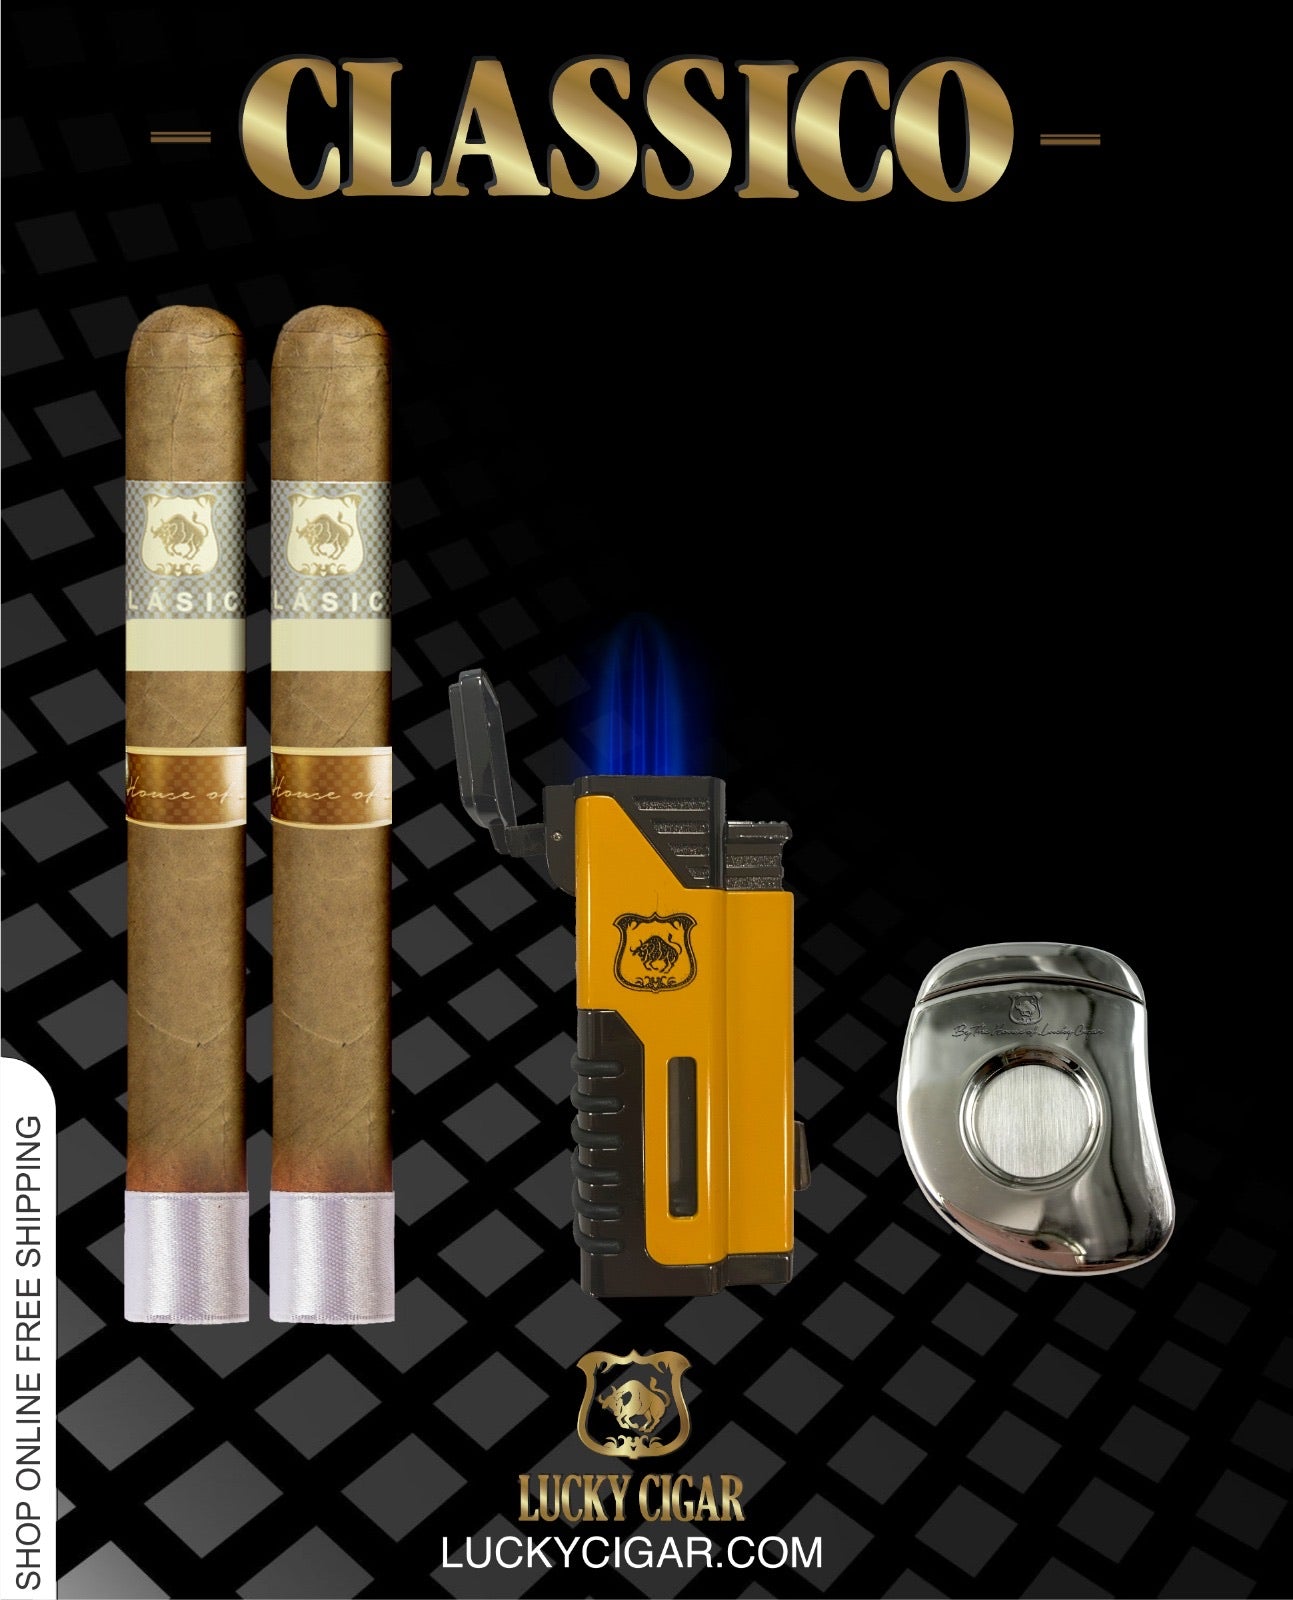 Classic Cigars - Classico by Lucky Cigar: Set of 2 Cigars, Toro with Torch, Cutter